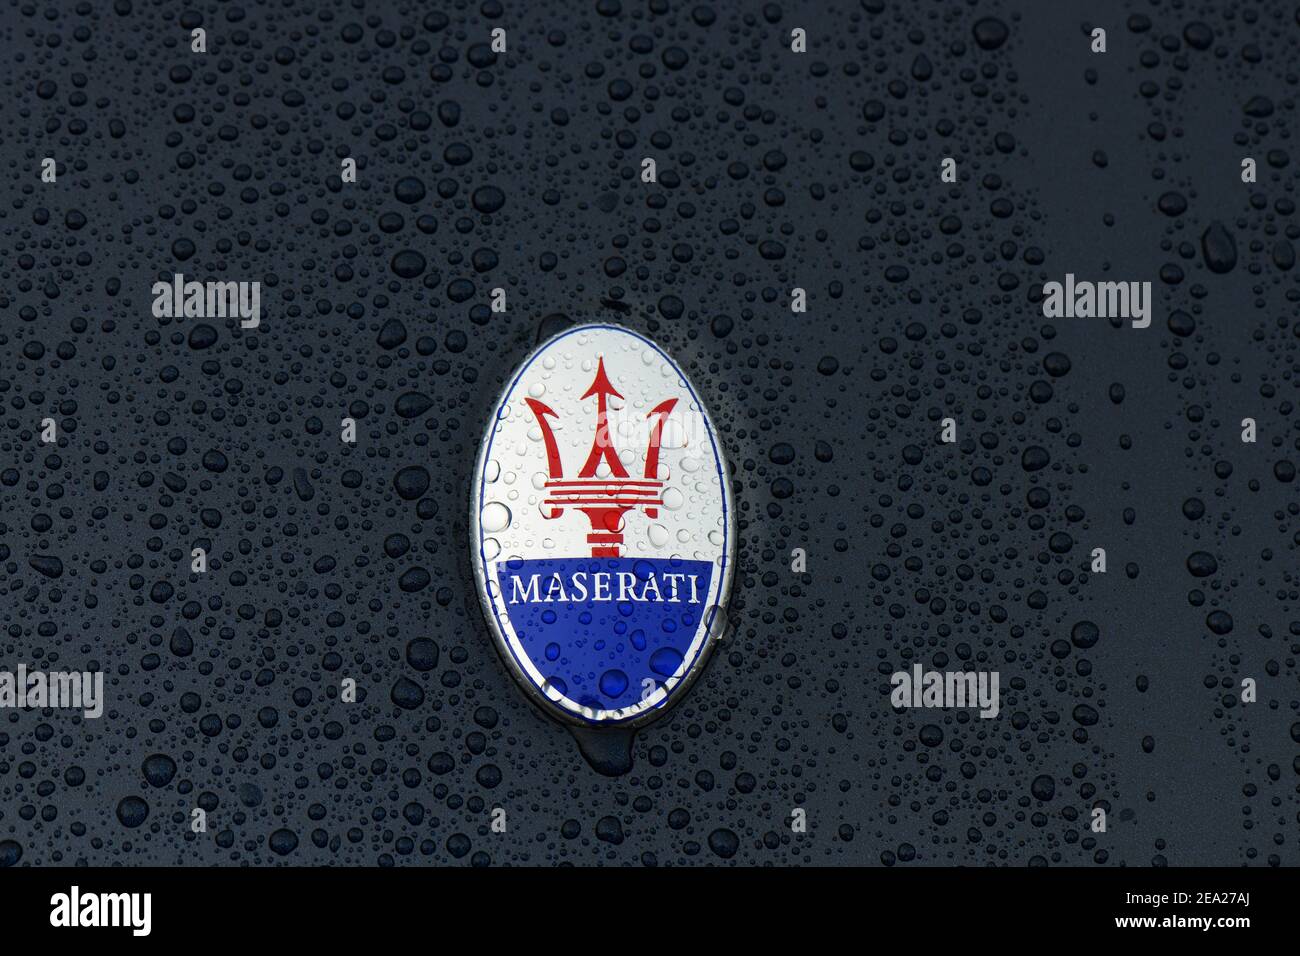 Maserati car logo iPhone 4s Wallpaper  Welcome to my website to enjoy  more httpwwwilikewallpapernetiphonewallpaper  Maserati car Car  logos Maserati